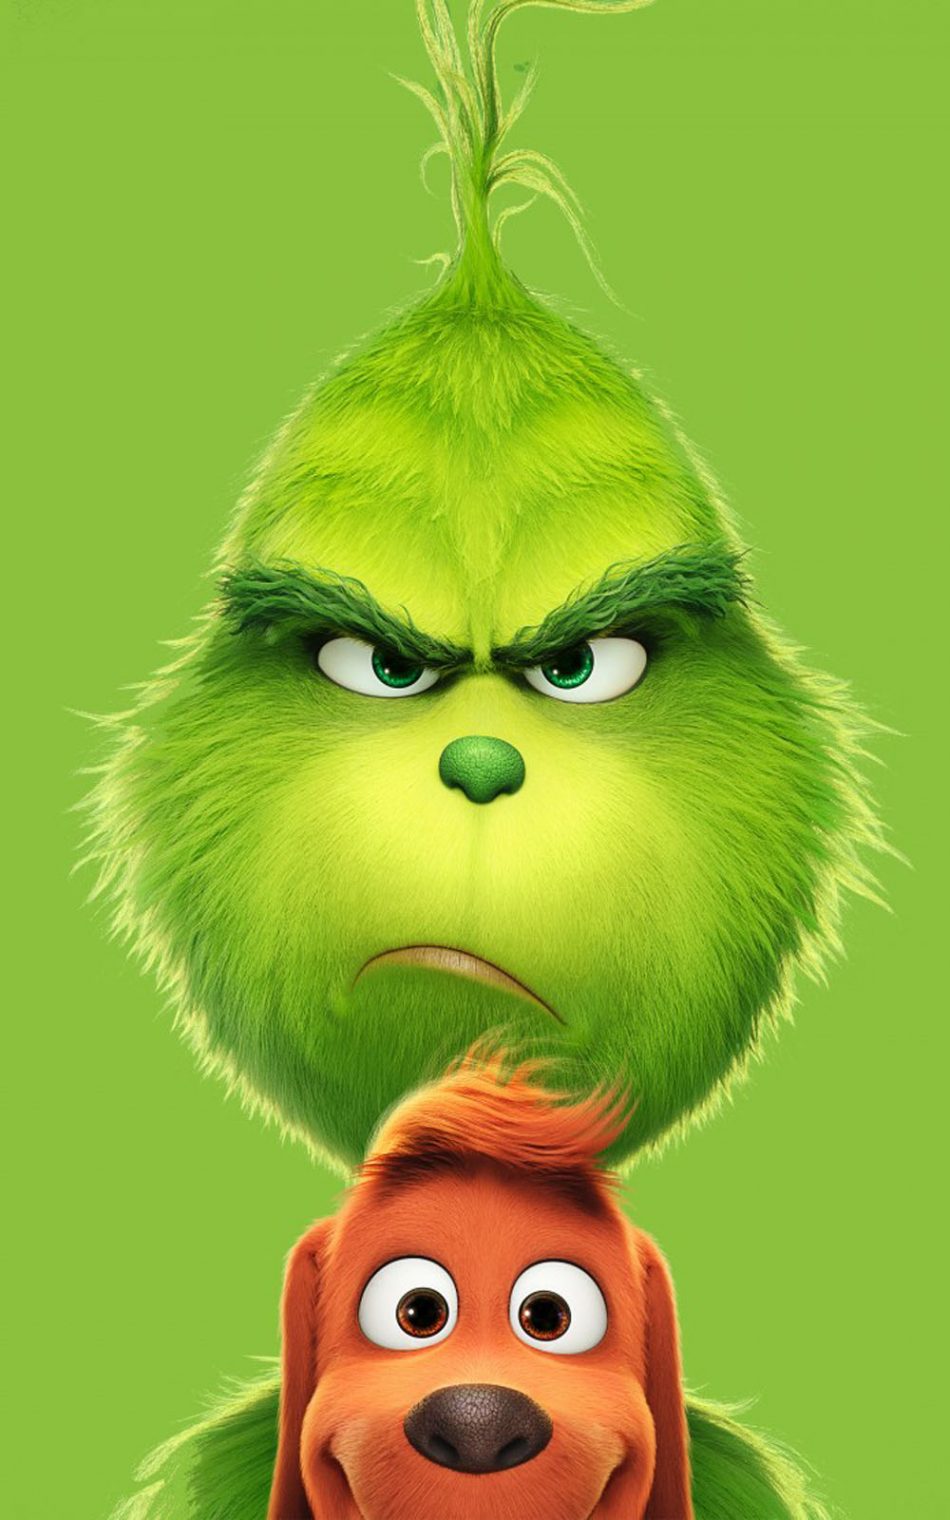 The Grinch Animation Comedy 2018 HD Mobile Wallpaper